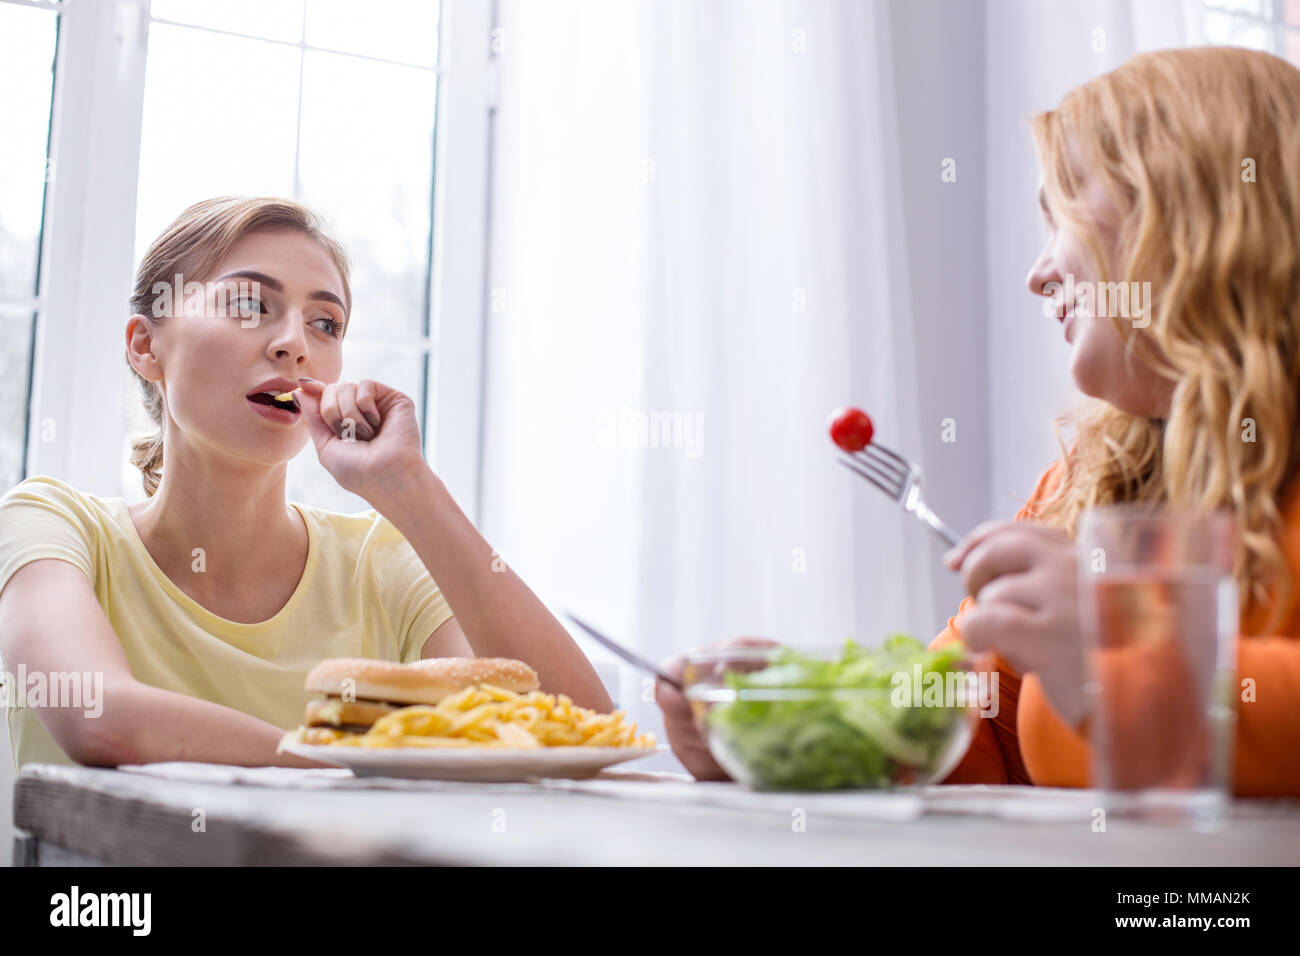 Serious slim woman having lunch with her friend Stock Photo